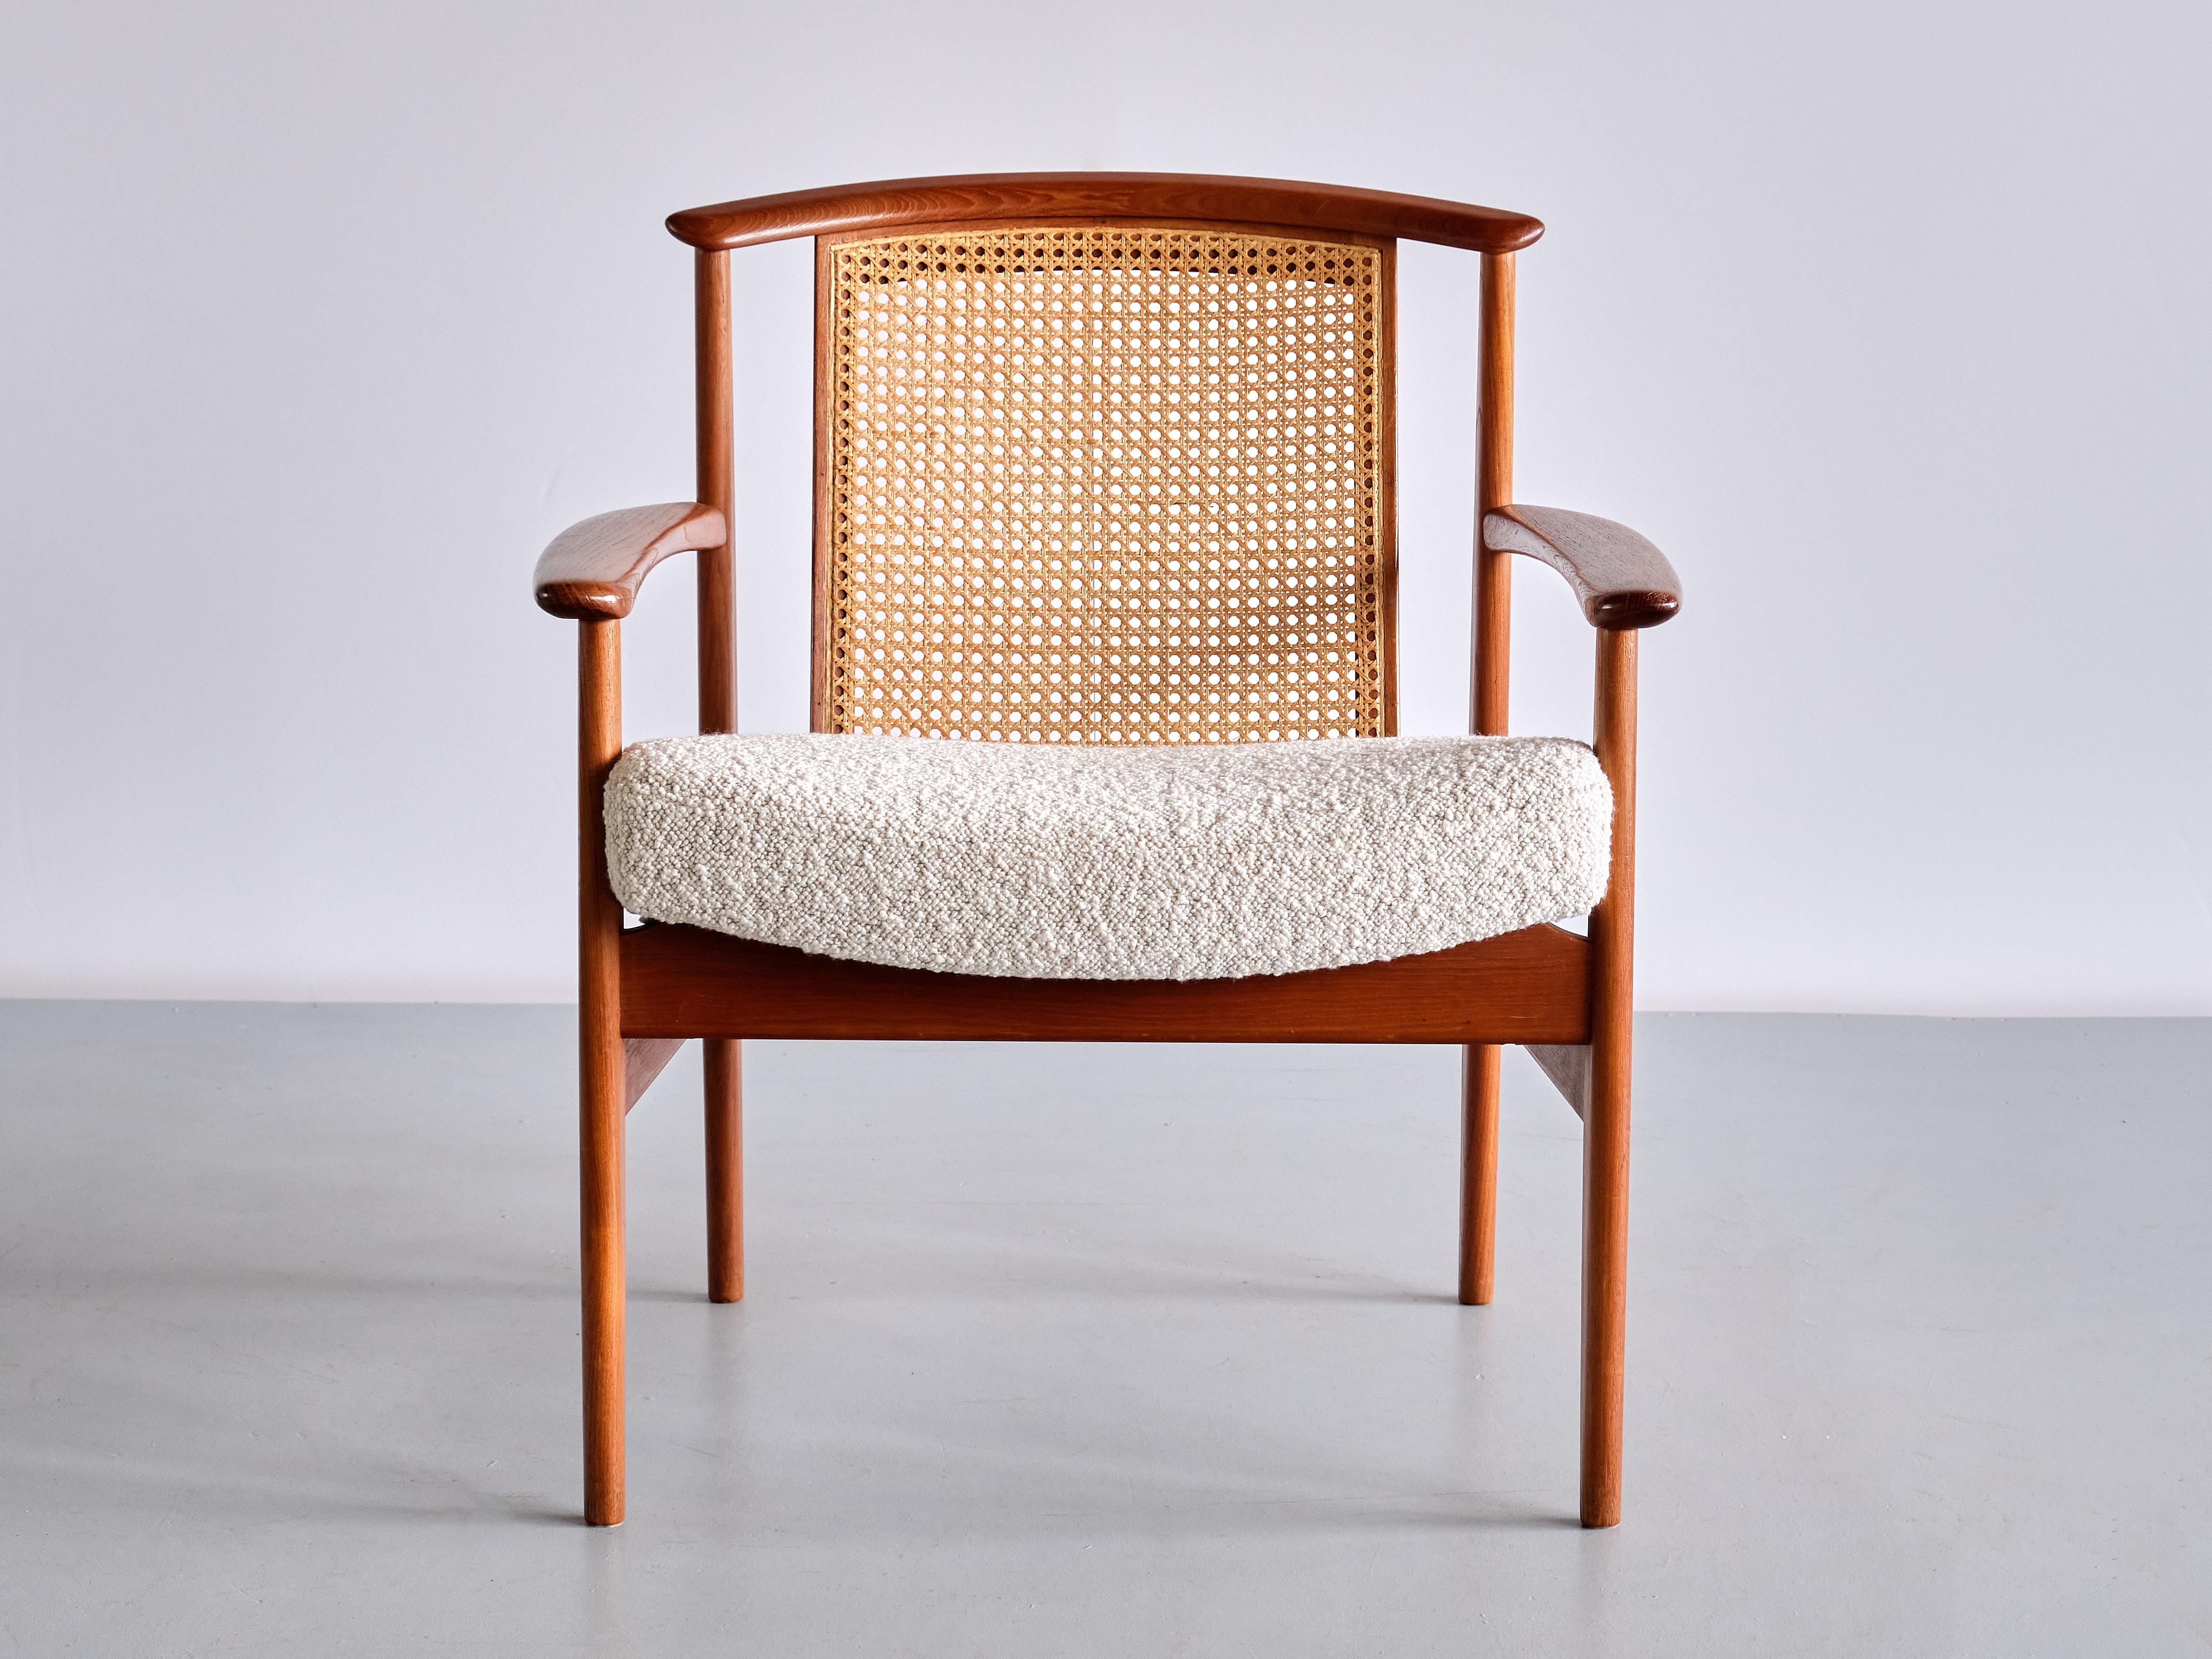 This rare armchair was designed by Folke Ohlsson and produced by the Swedish manufacturer DUX in the 1960s. This particular model was named 'Dallas'.
The elegant design is marked by the centrally placed, slightly sloping backrest in French cane.